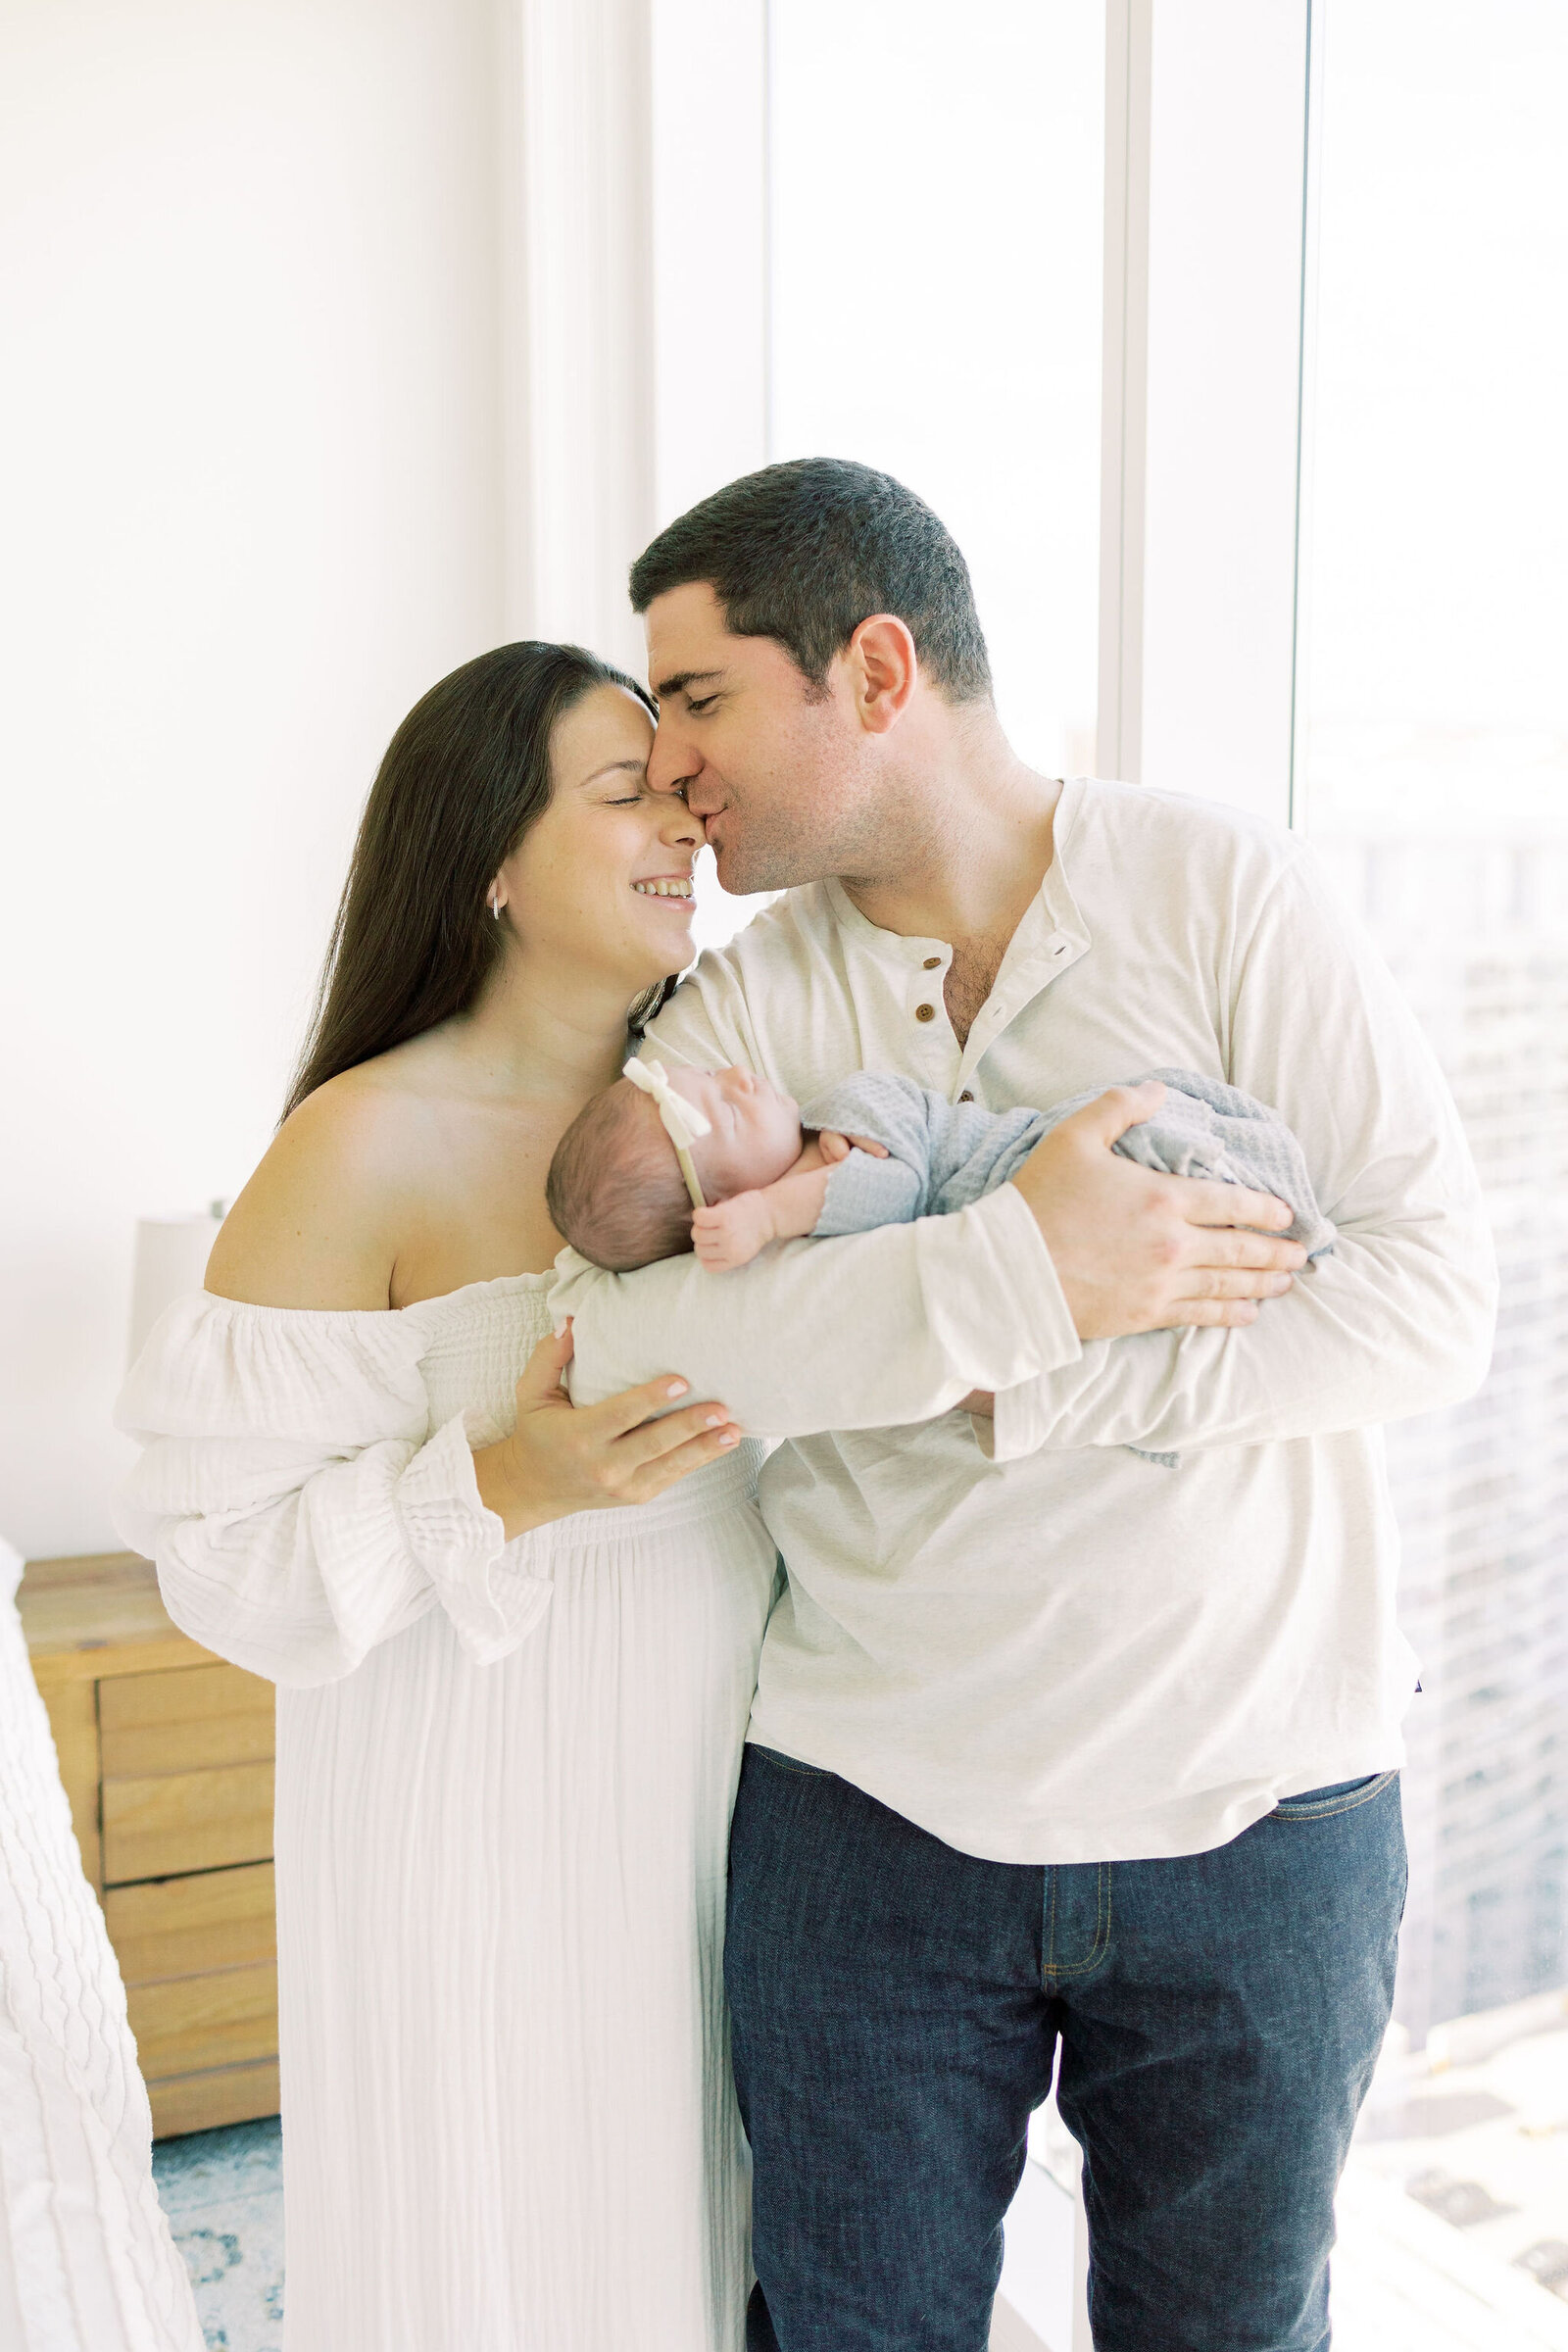 Husband kisses wife on nose during newborn session.